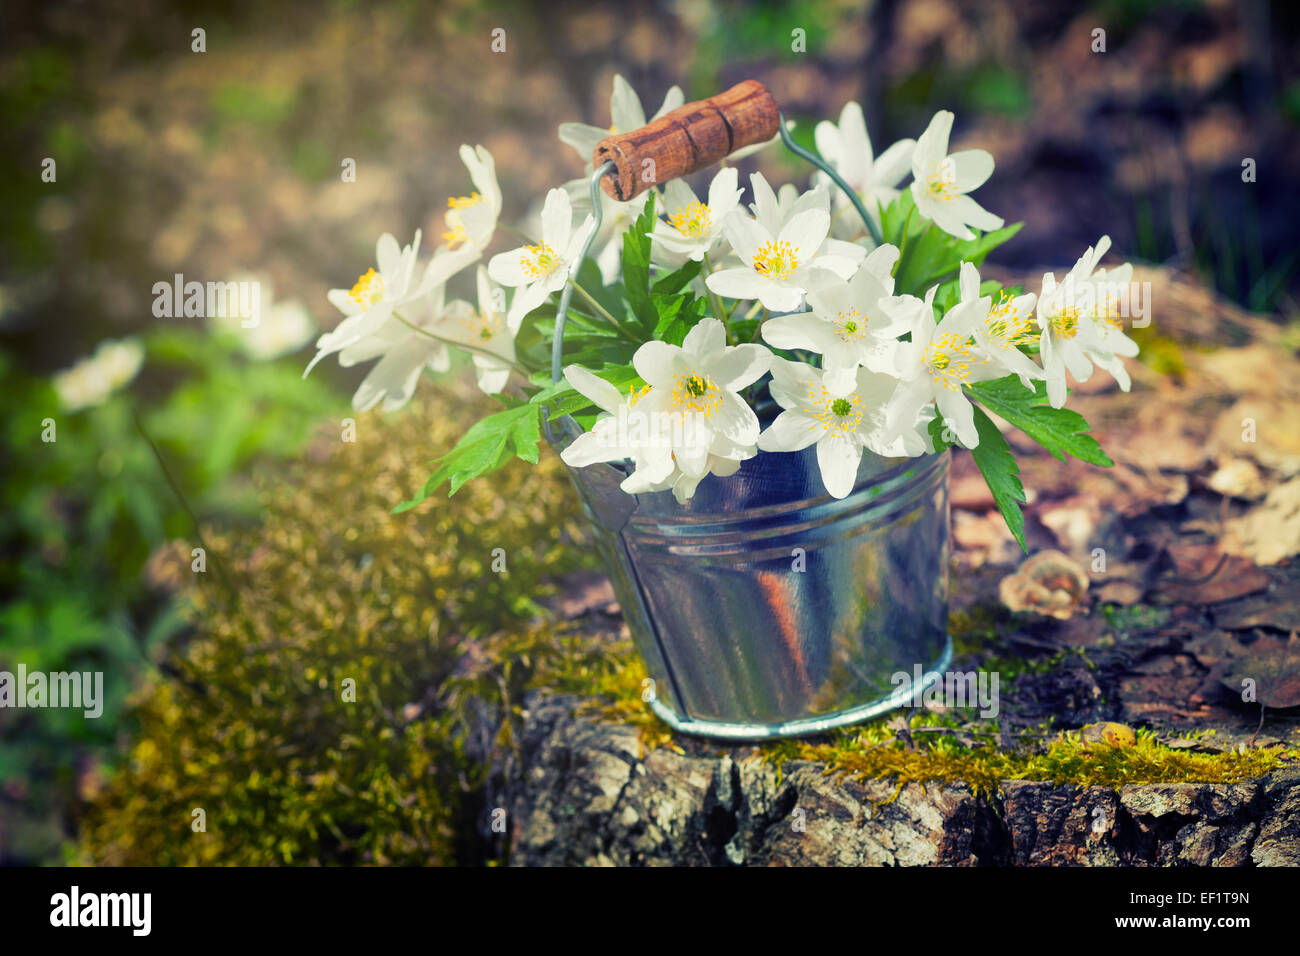 Wild spring flowers anemone in bucket on stump in forest. Retro stylized Stock Photo